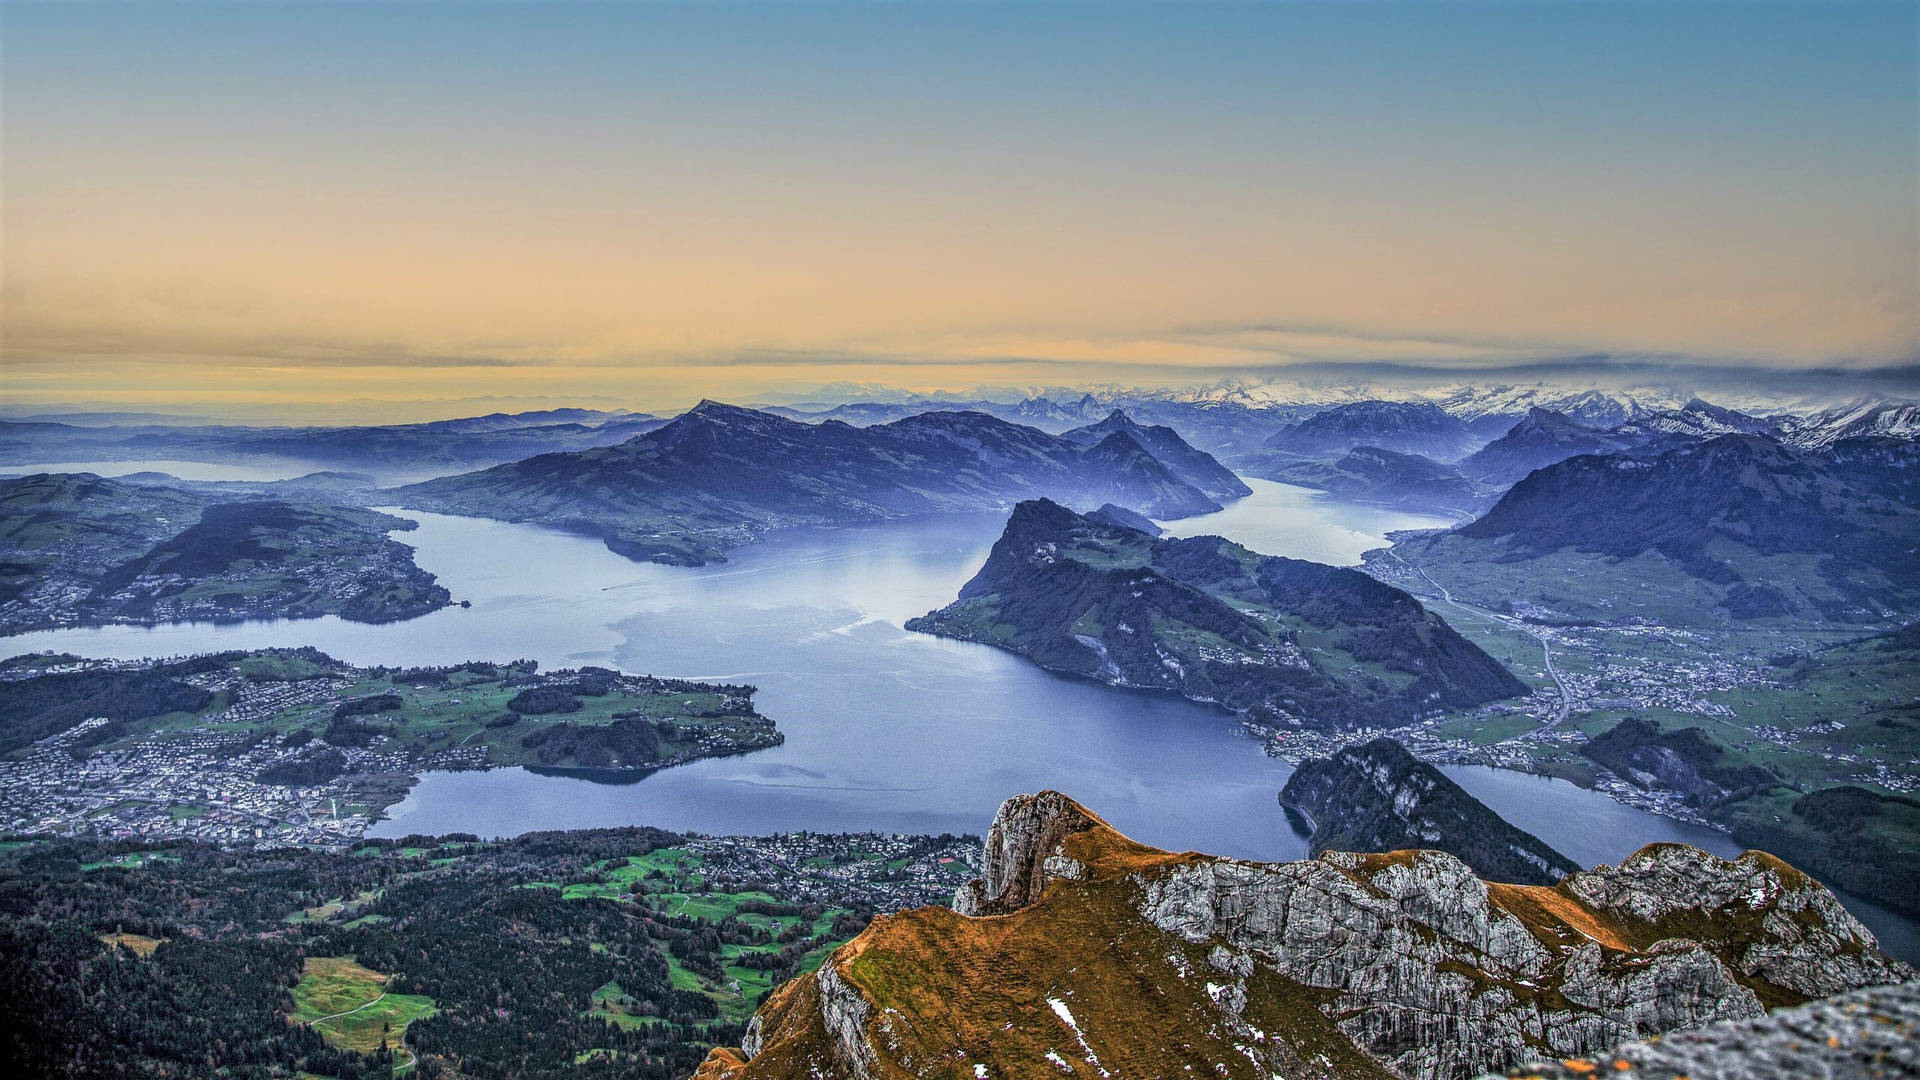 Captivating View Of Lake Lucerne In Switzerland